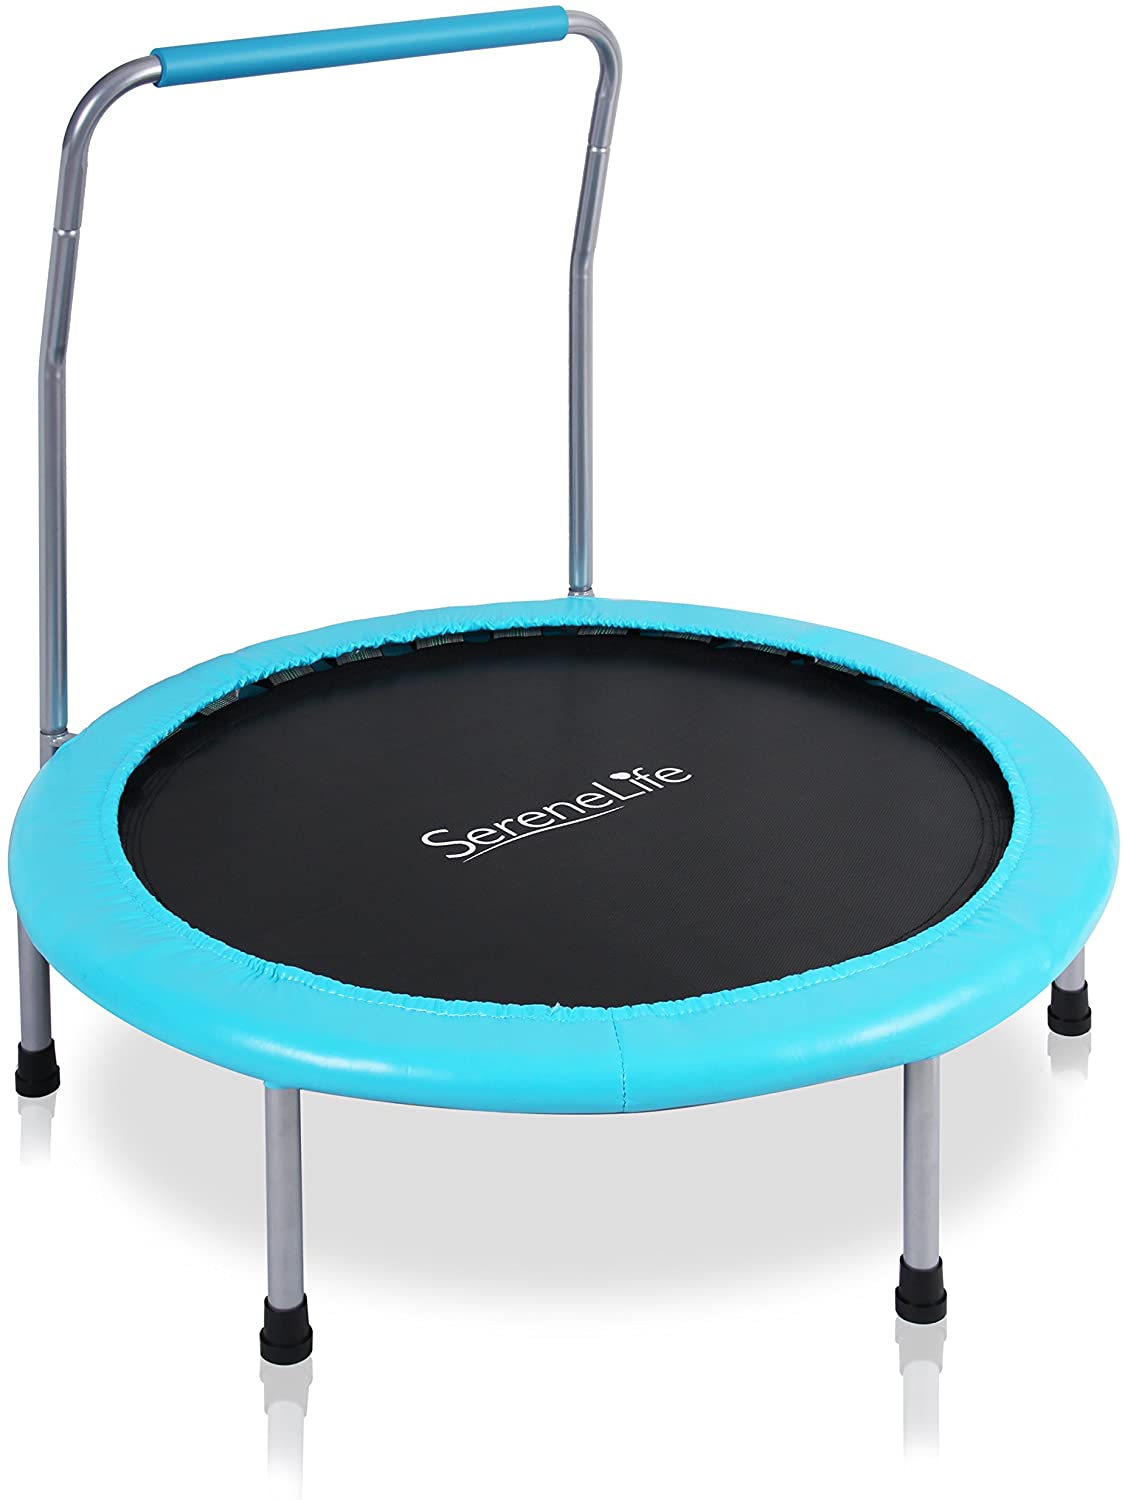 36-Inch Trampoline Mini Rebounder Suitable for Indoor and Outdoor for 2 KIDs 